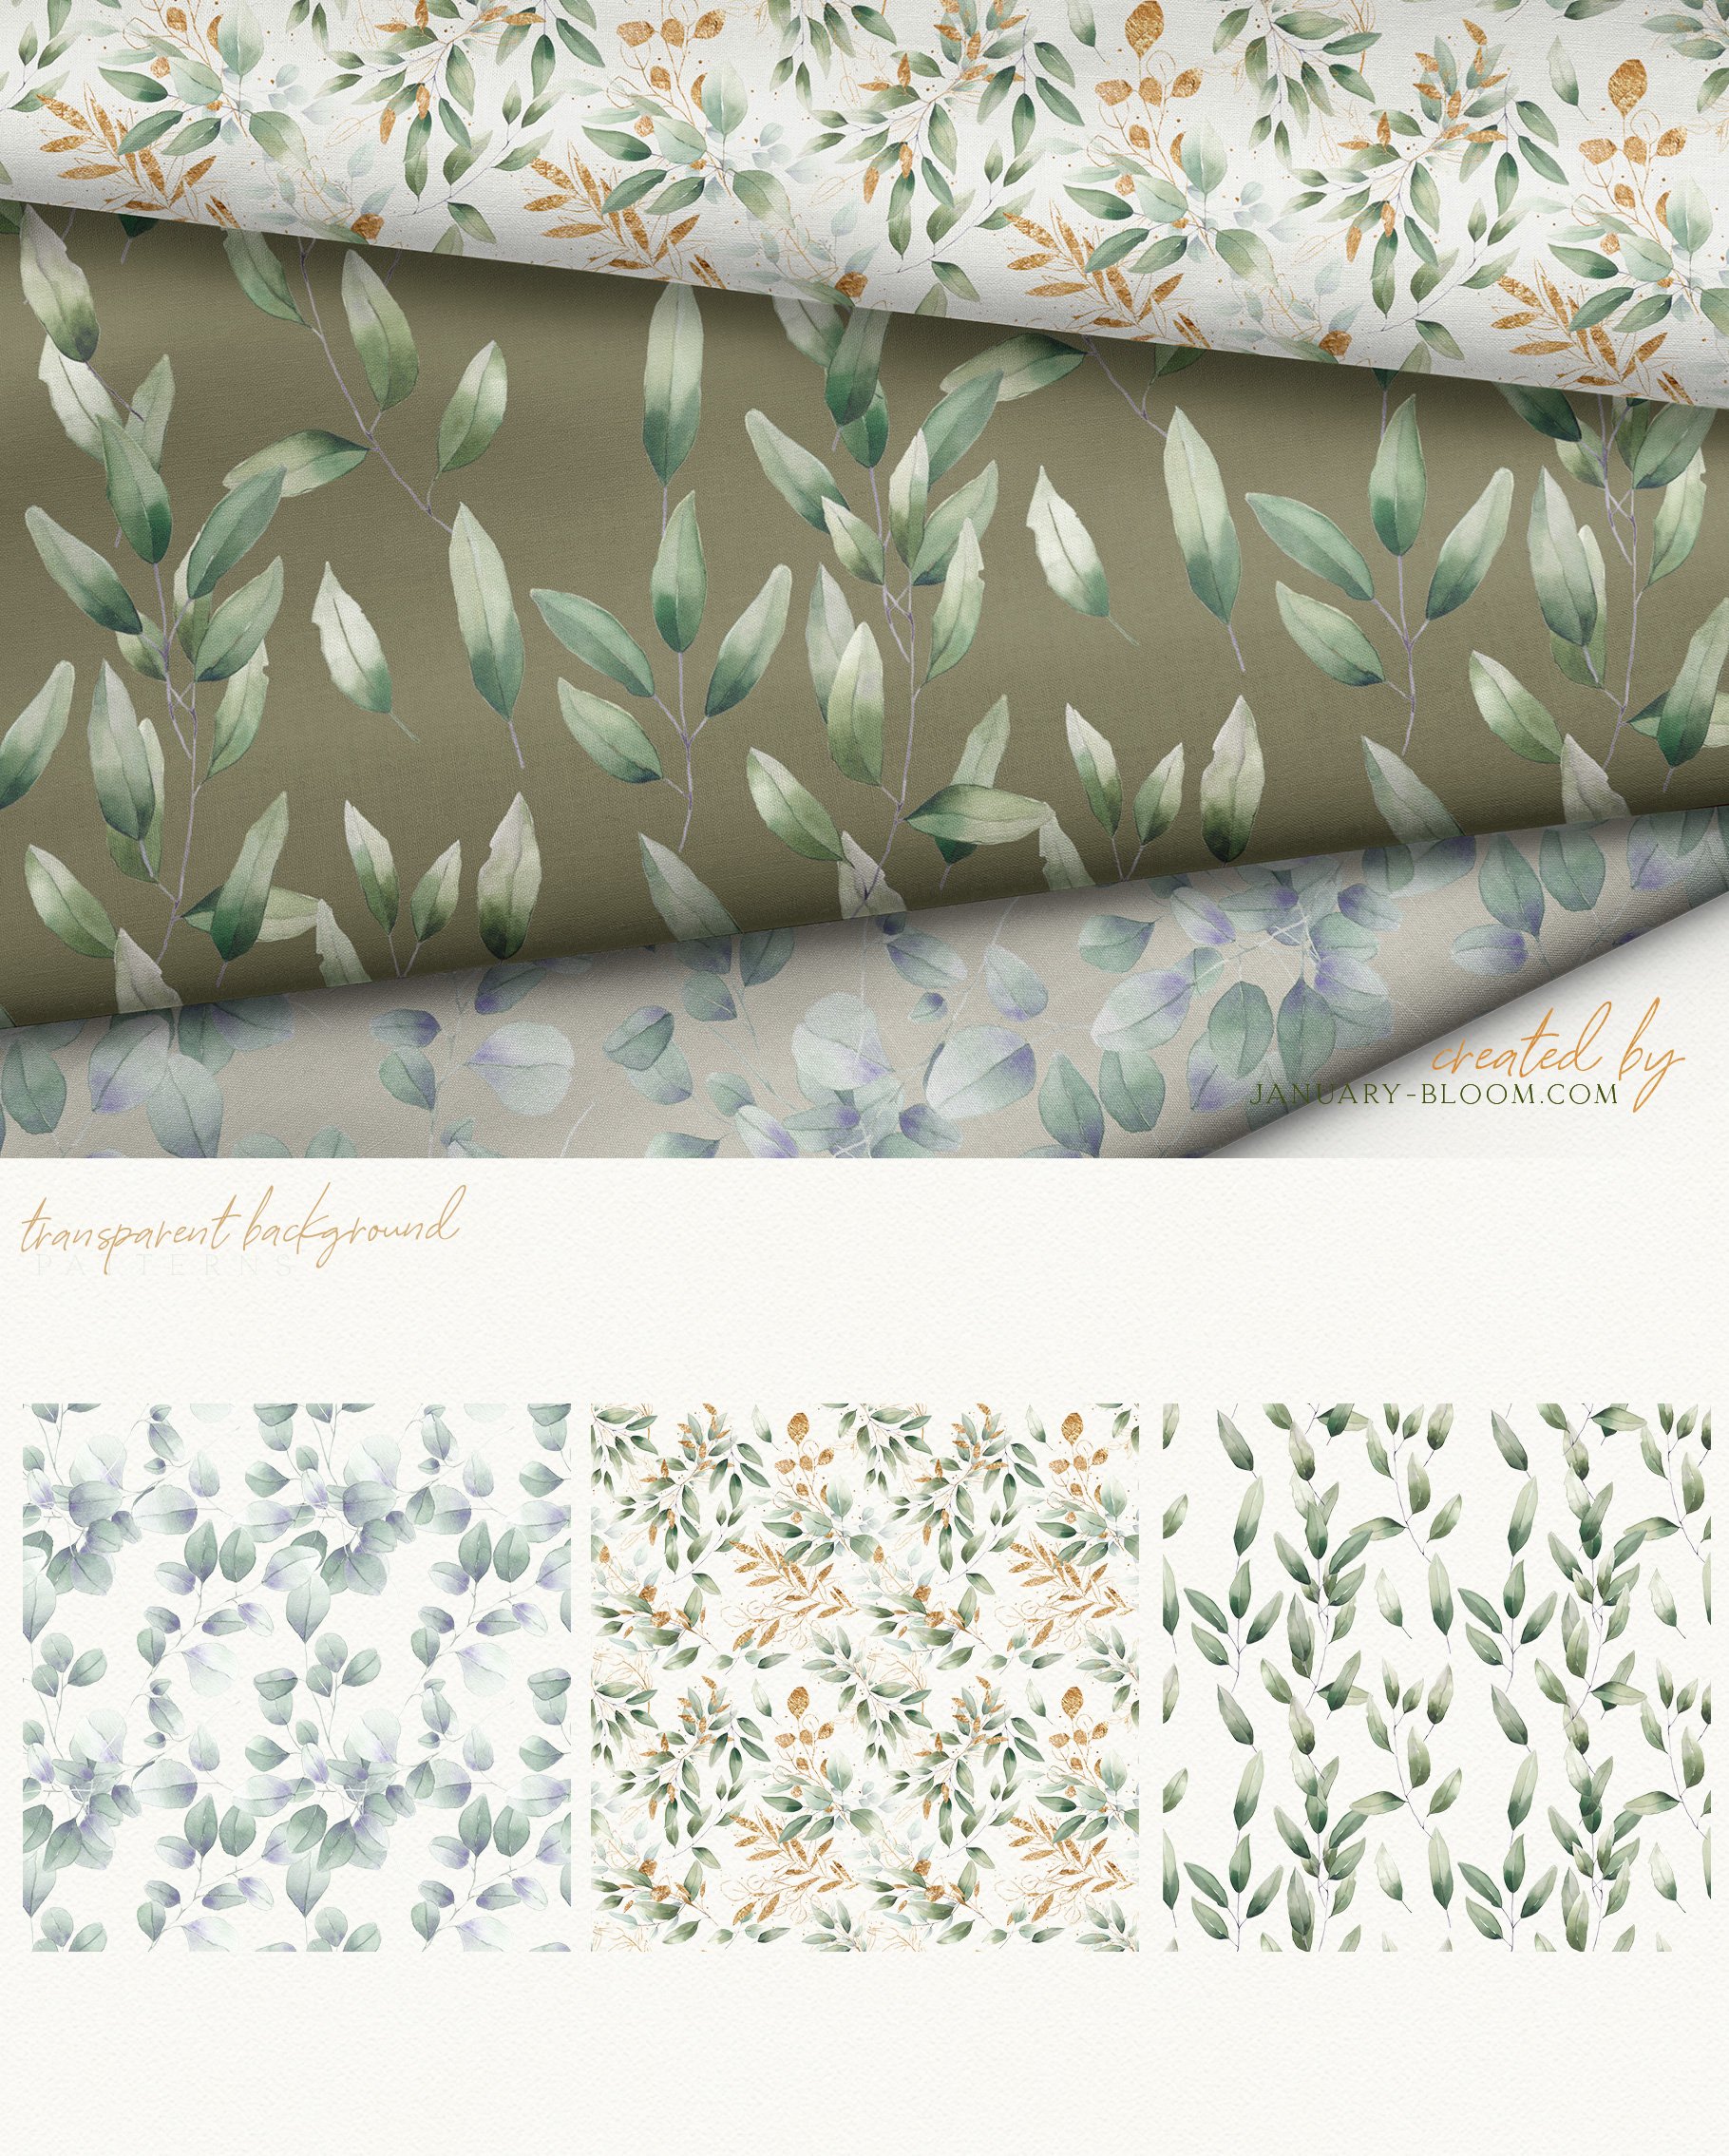 Set of four papers with leaves on them.